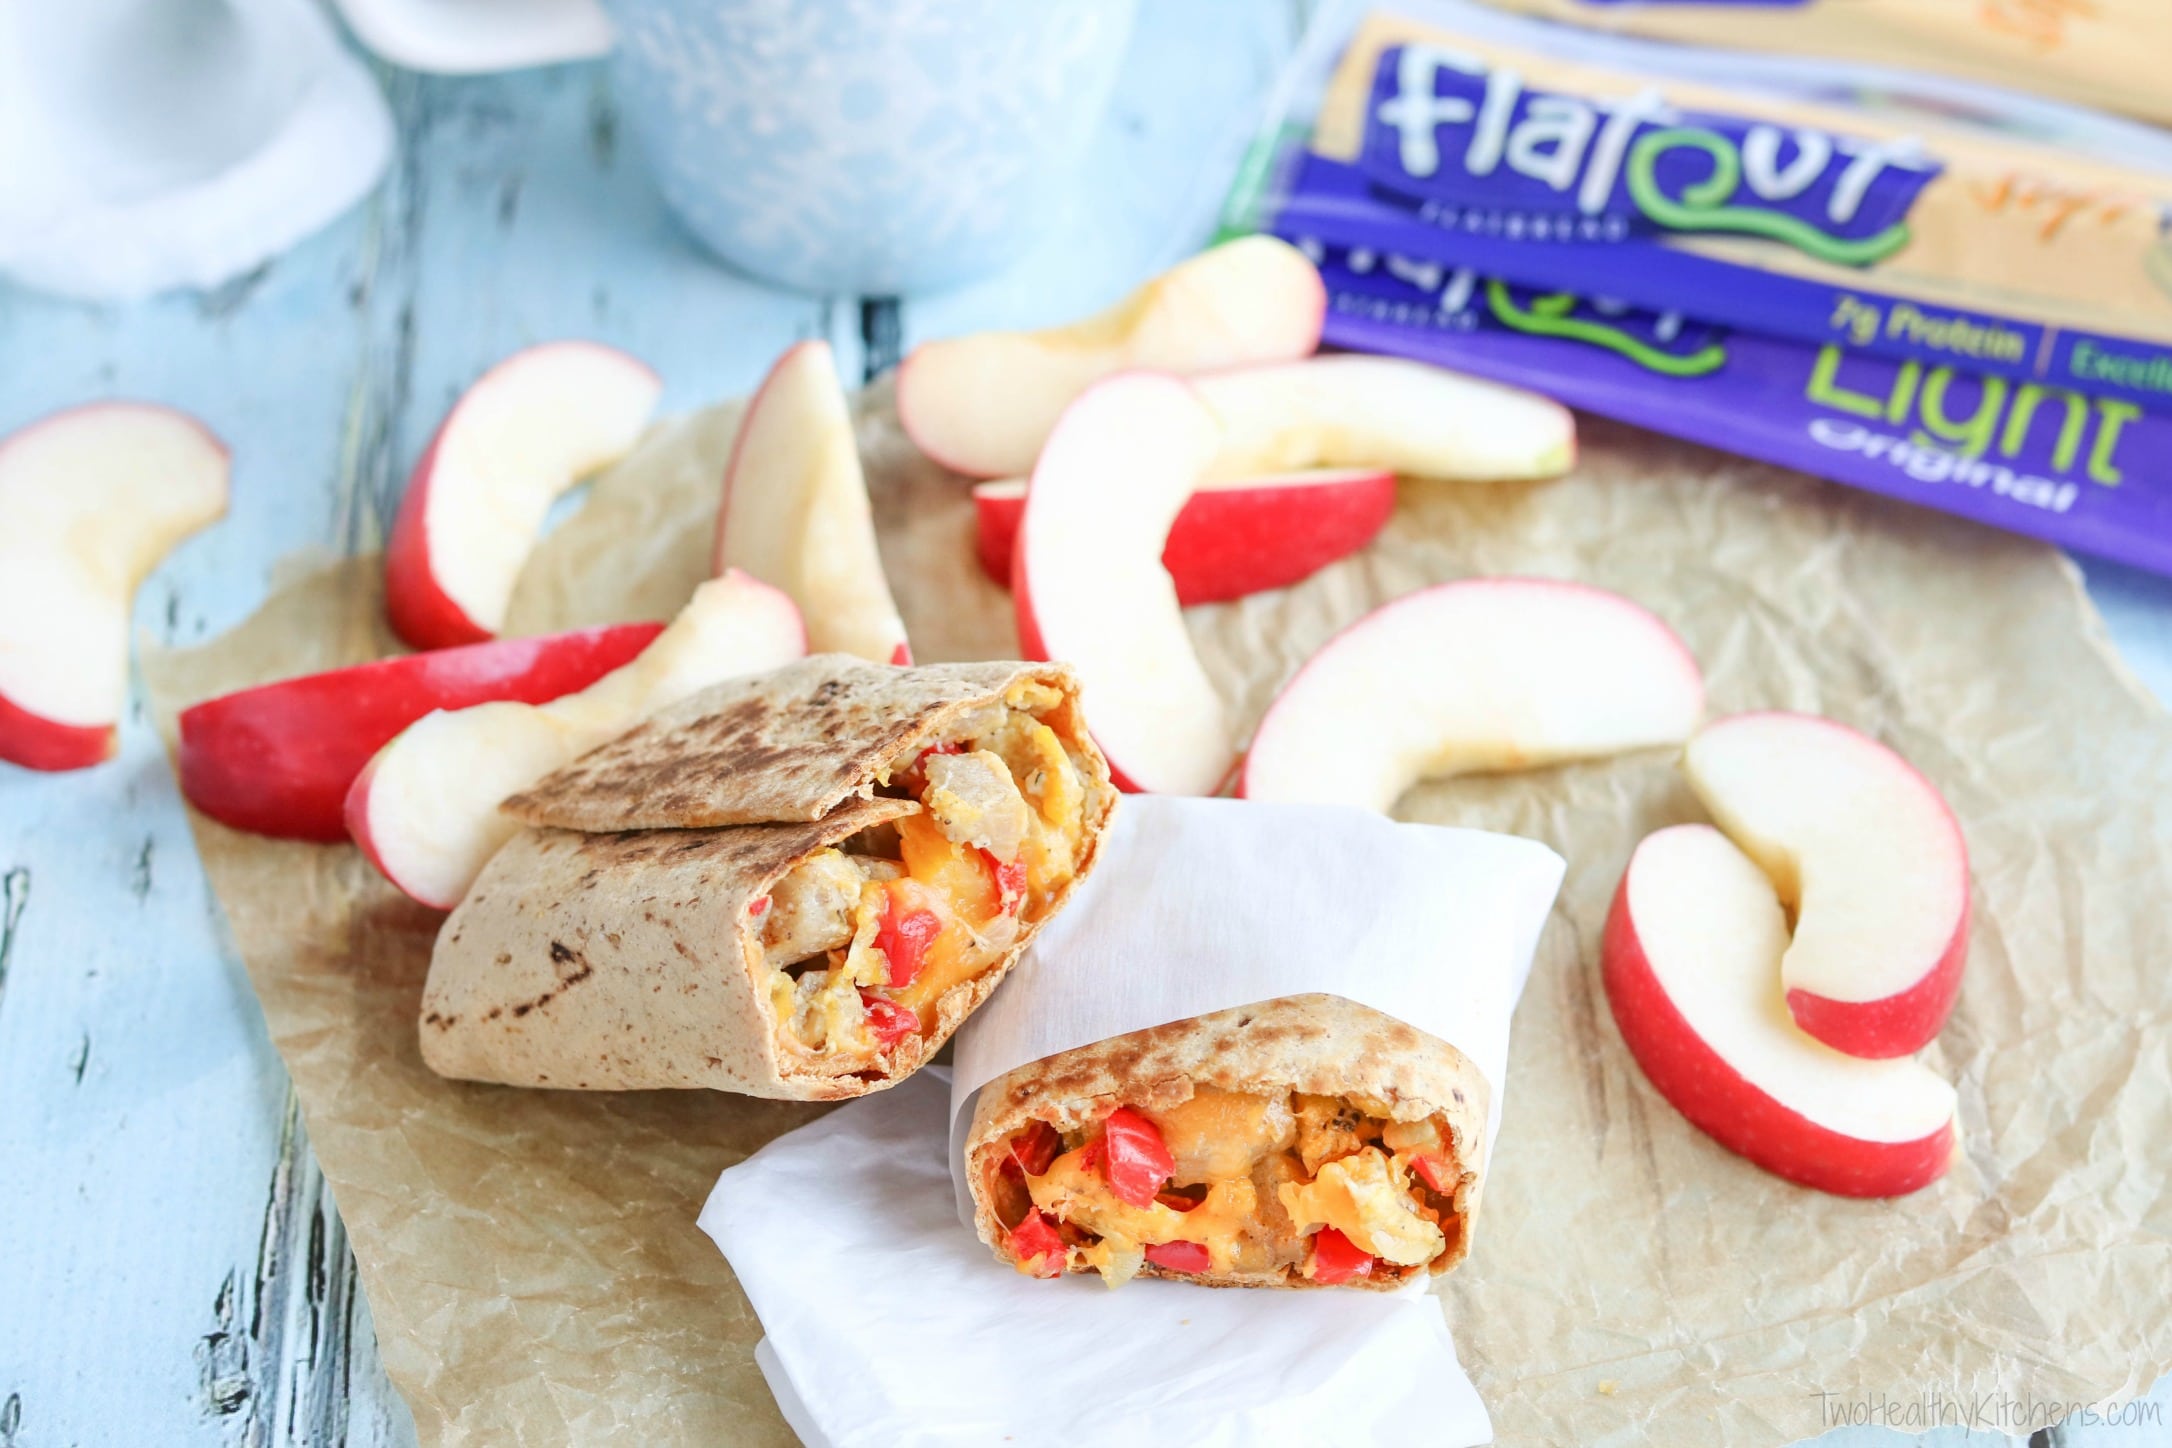 Burrito cut in half on parchment with apple slices, coffee mug and packages of Flatout wraps nearby.